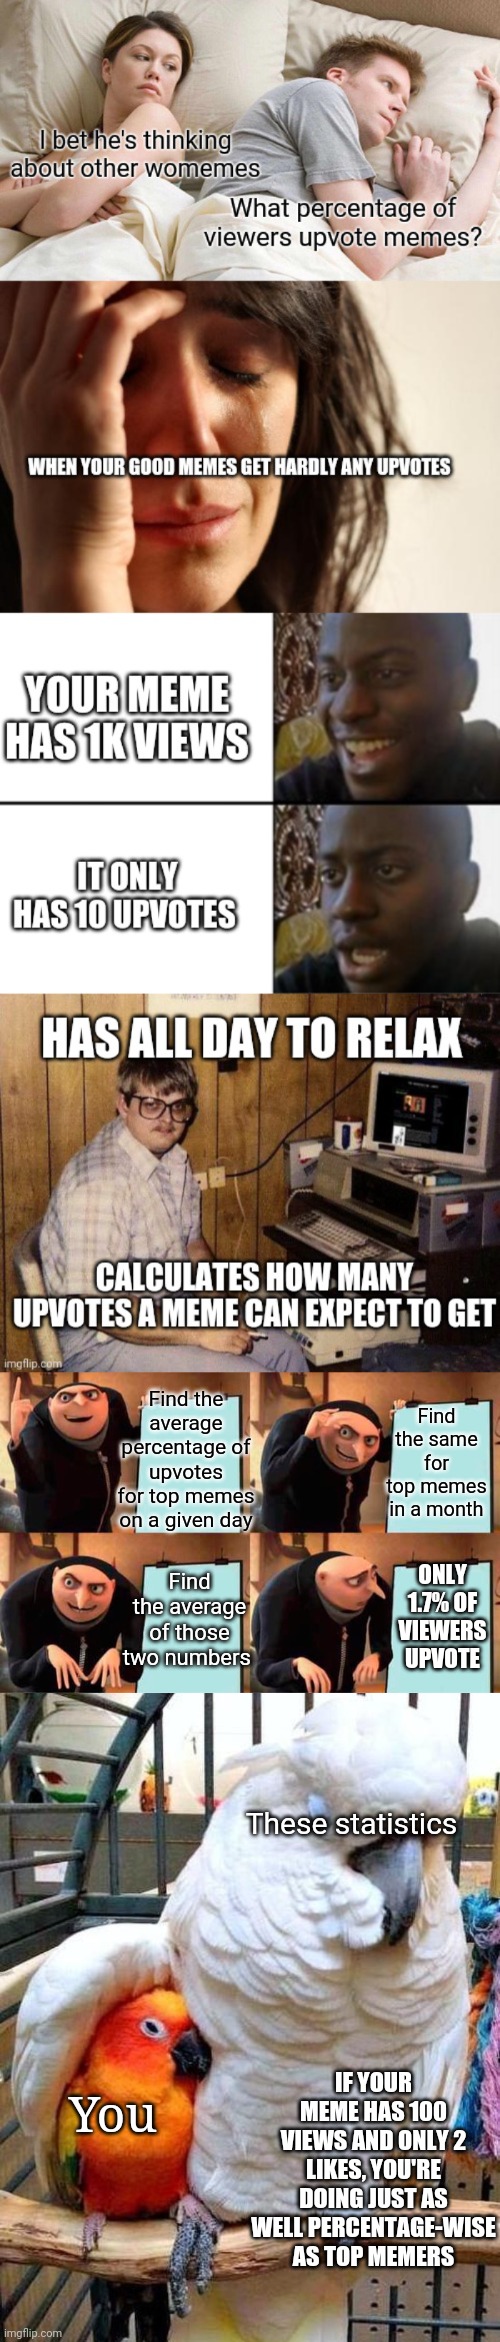 Only 1.7% of viewers upvote memes | Find the same for top memes in a month; Find the average percentage of upvotes for top memes on a given day; ONLY 1.7% OF VIEWERS UPVOTE; Find the average of those two numbers; These statistics; IF YOUR MEME HAS 100 VIEWS AND ONLY 2 LIKES, YOU'RE DOING JUST AS WELL PERCENTAGE-WISE AS TOP MEMERS; You | image tagged in memes,gru's plan,big bird comforting small bird,statistics | made w/ Imgflip meme maker